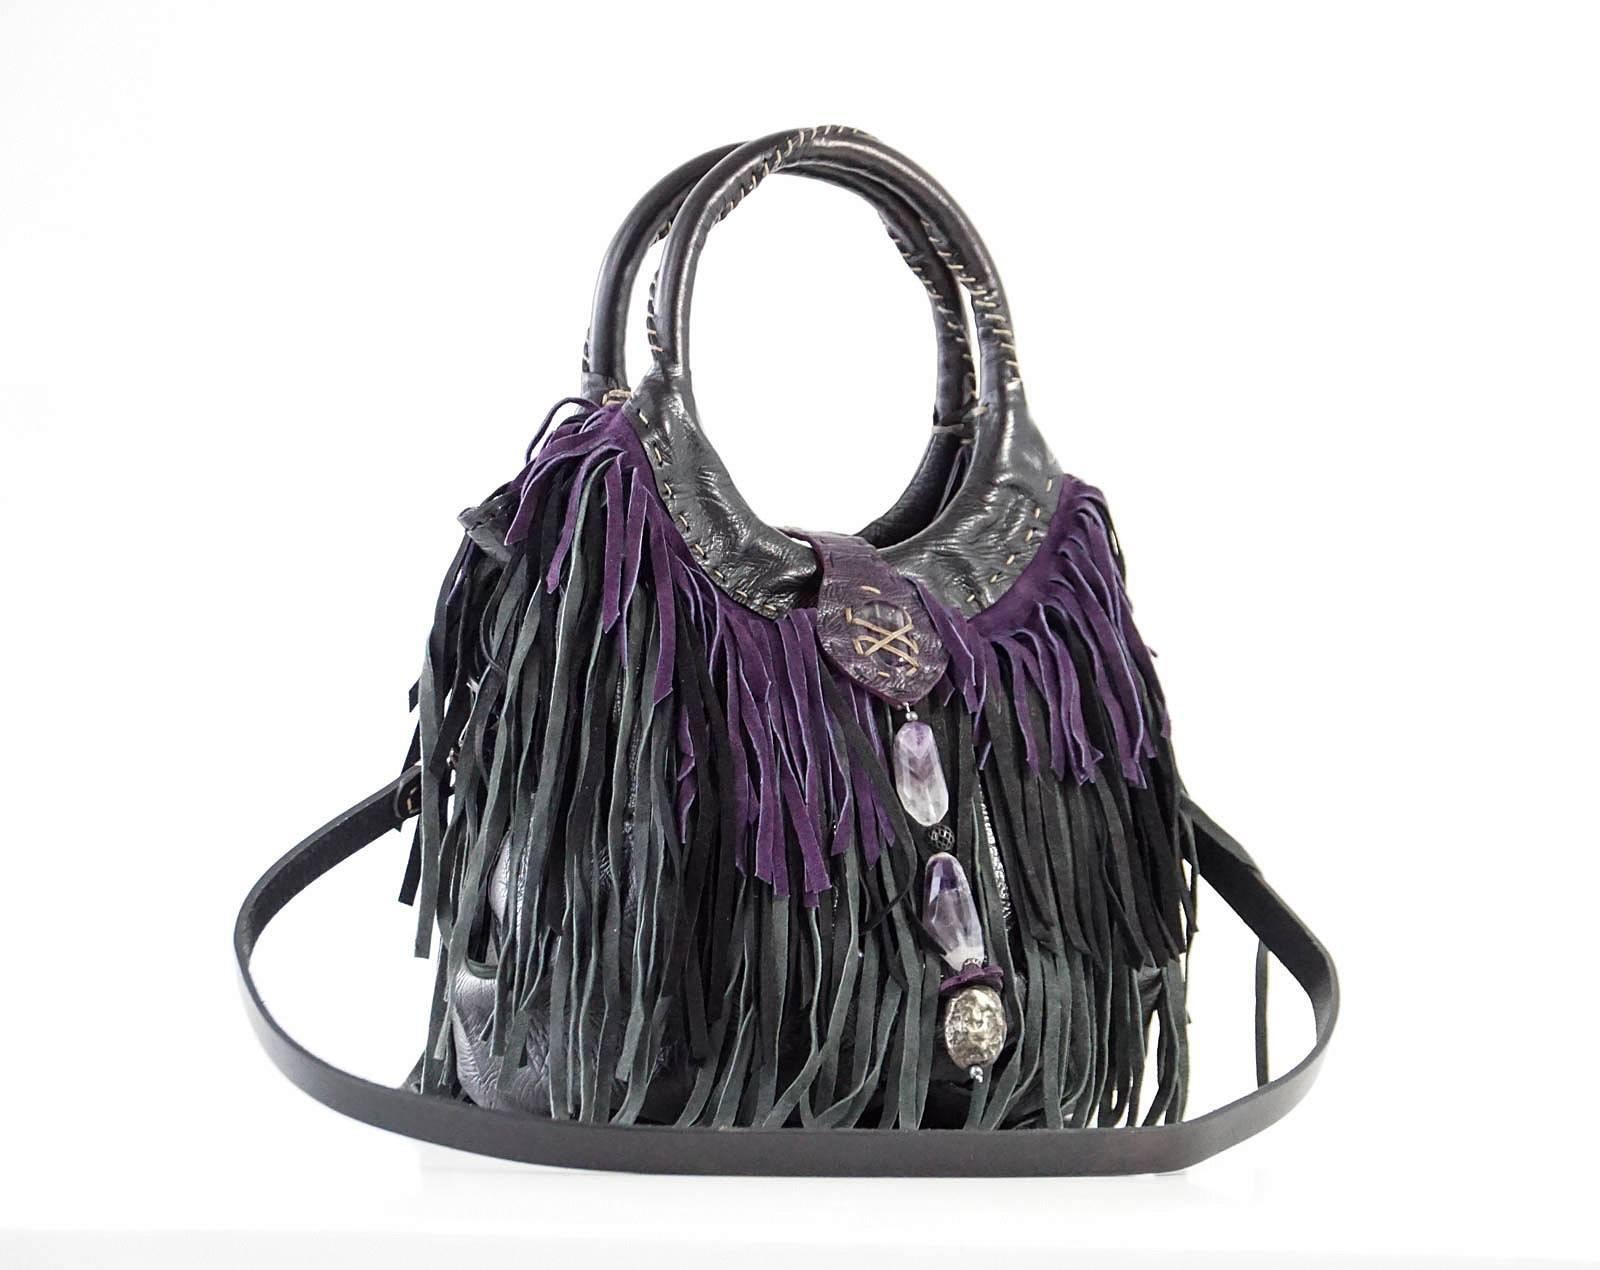 Guaranteed authentic HENRY BEGUELIN handmade fringe Folies Bijoux shoulder / handbag with detachable strap.
3 layers of suede fringe in plum, charcoal and black.
Body is leather with beautiful stitch detail.
Round handles with signature top stitch